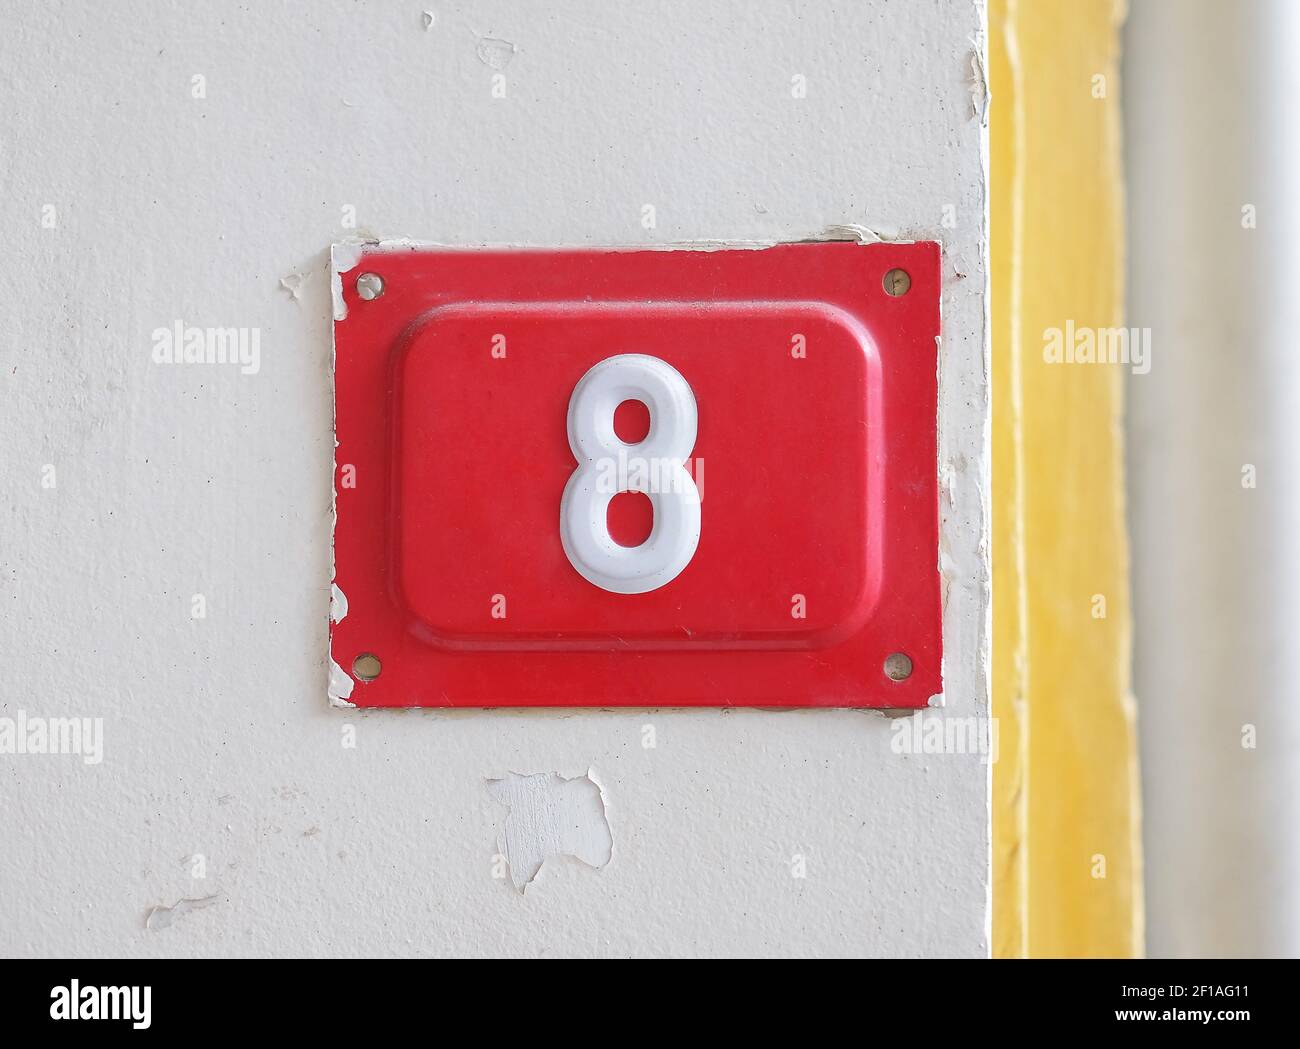 Red house street number 8 on the wall Stock Photo